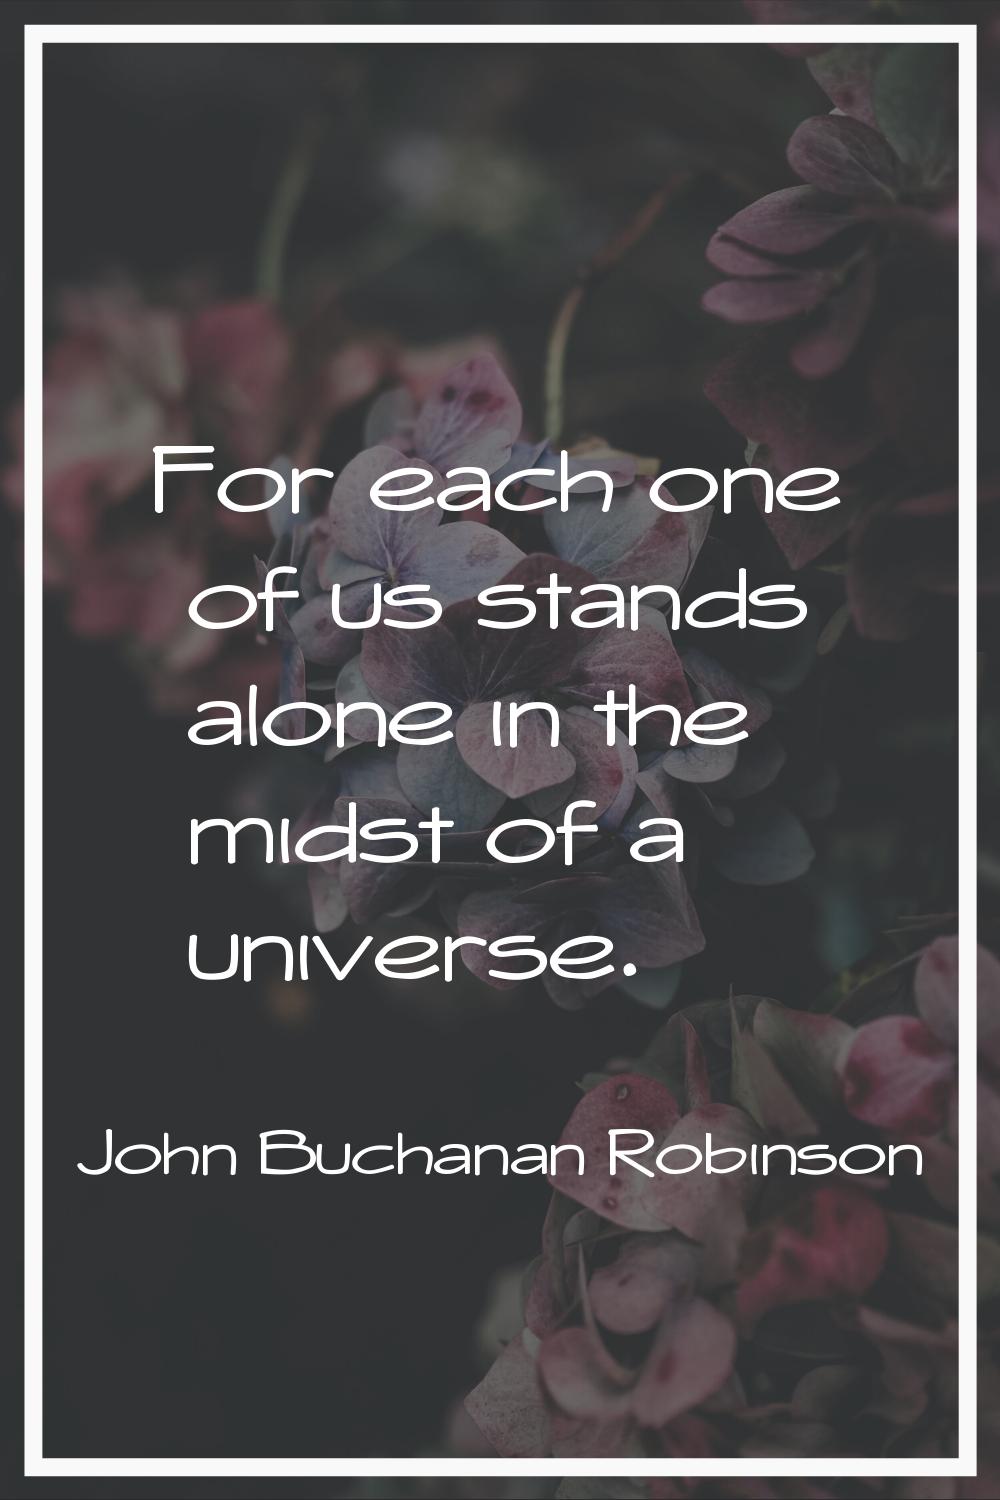 For each one of us stands alone in the midst of a universe.